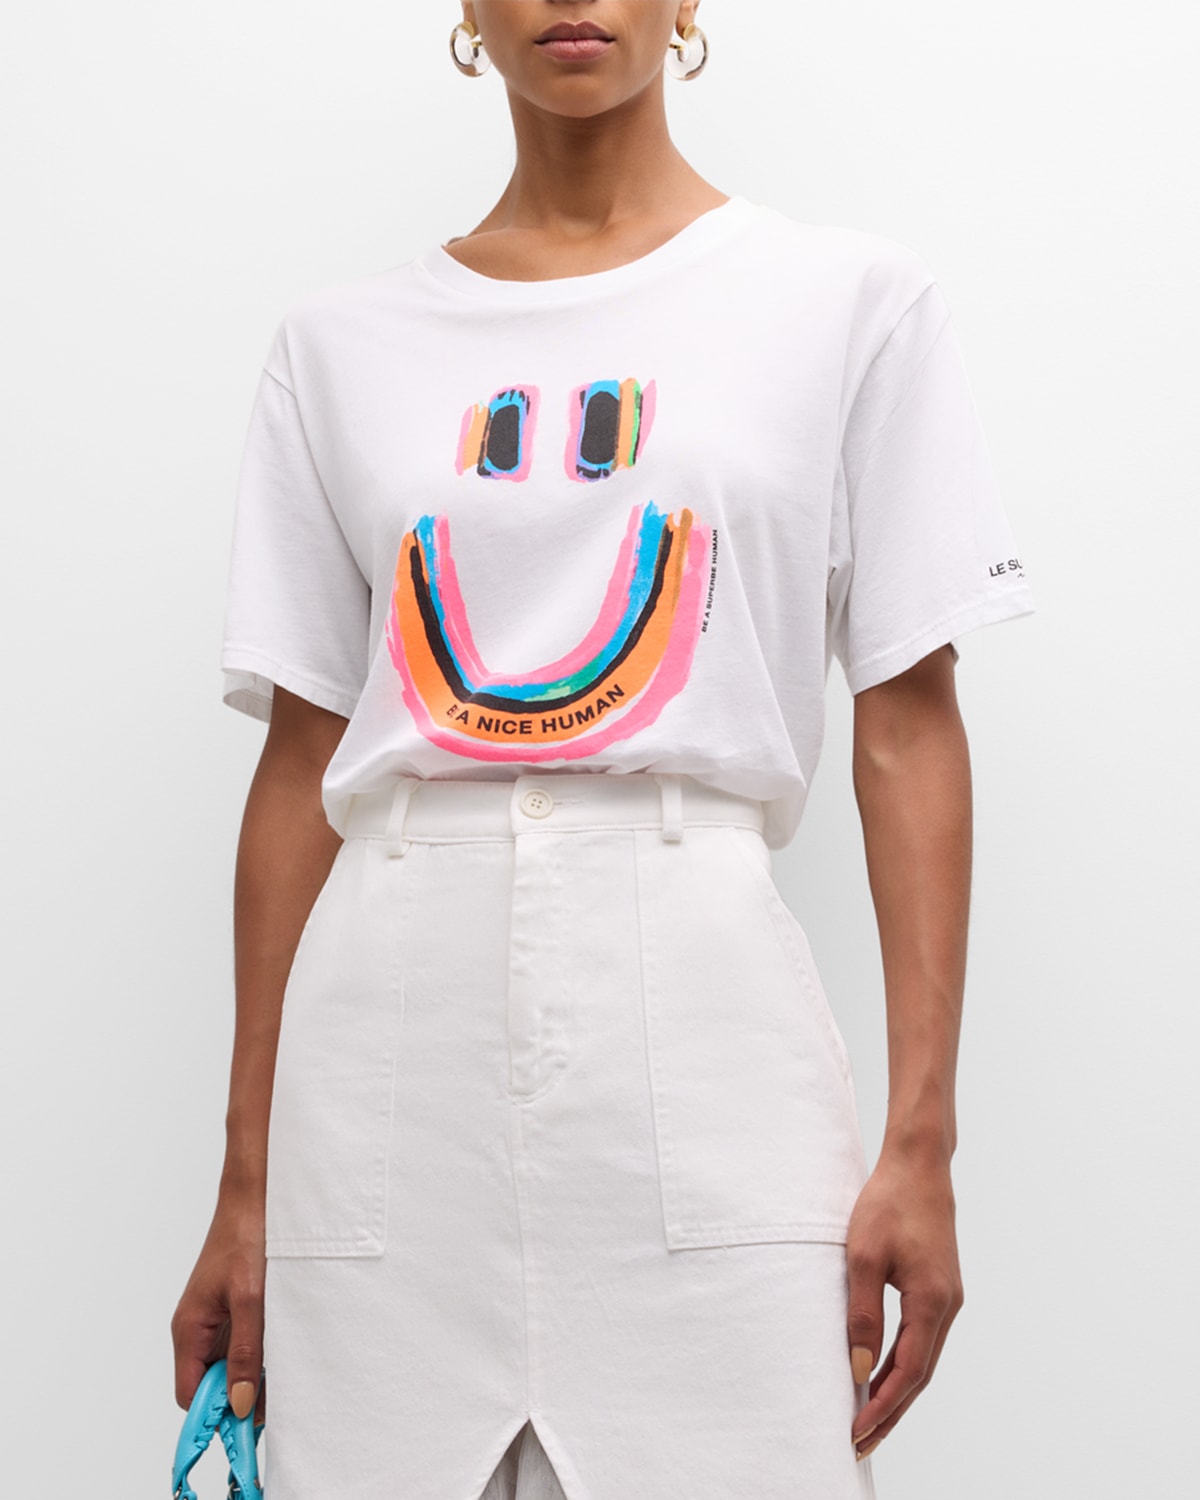 Le Superbe Summer Of Love Tee In White